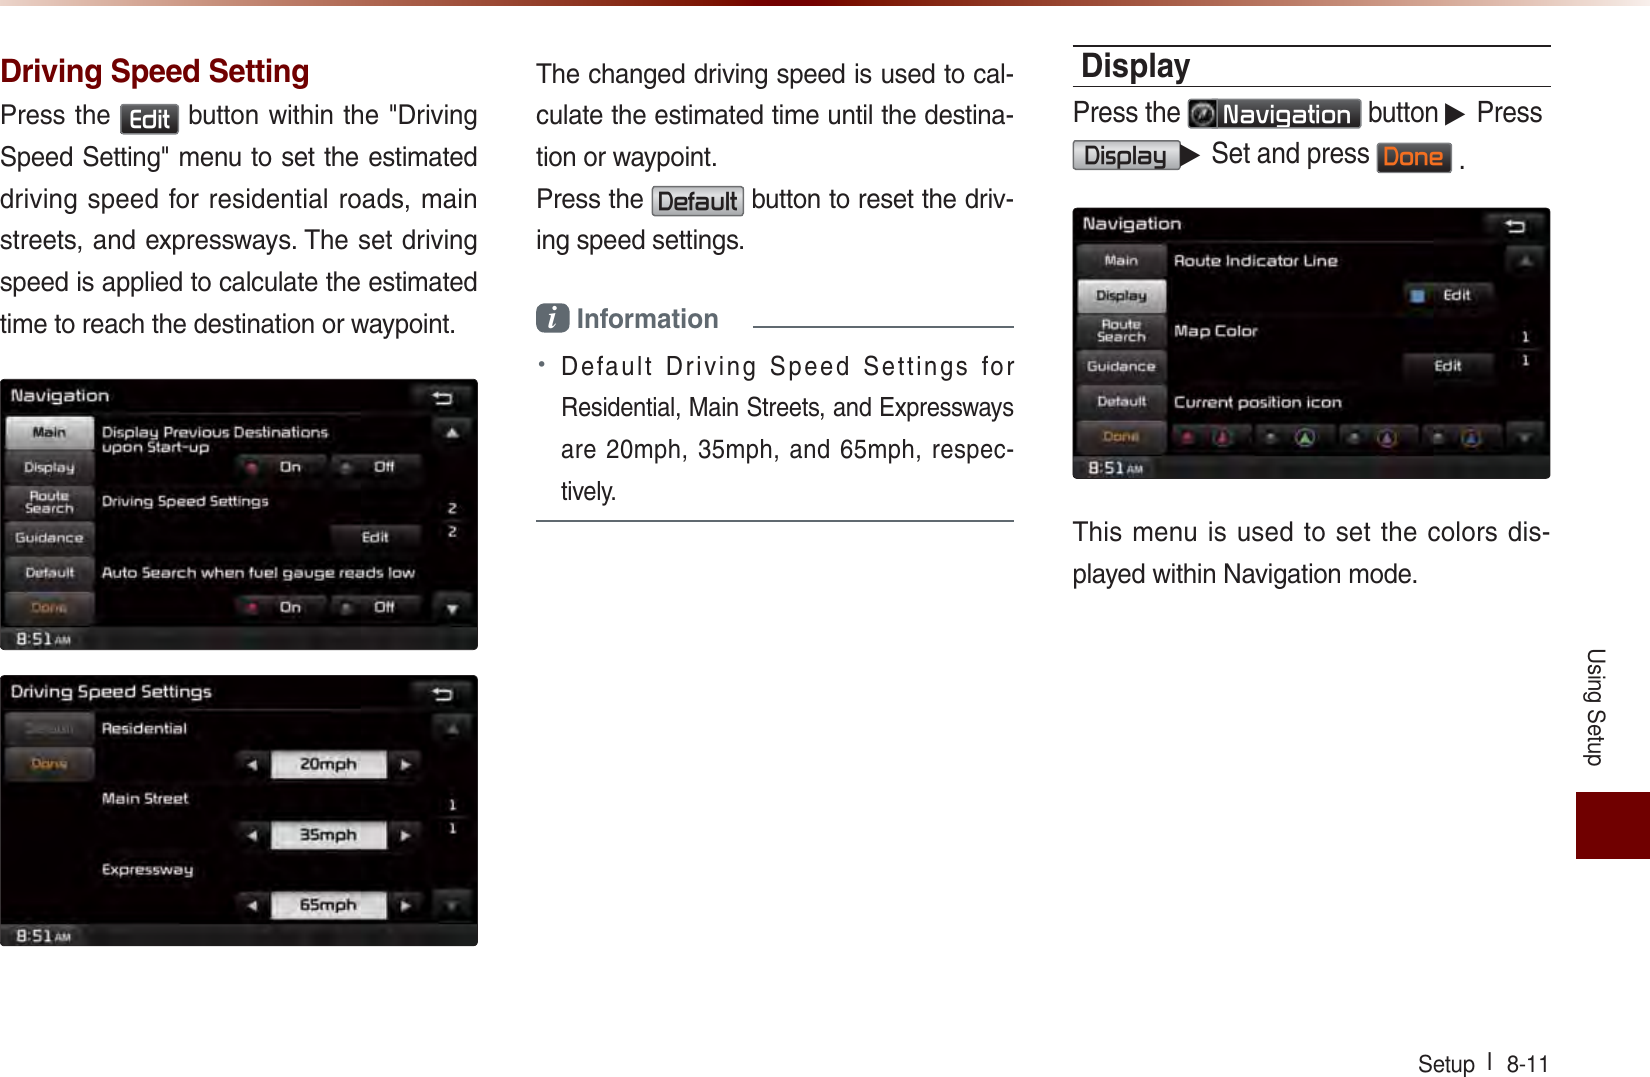 Using SetupSetup l  8-11 Driving Speed SettingPress the (GLW button within the &quot;Driving Speed Setting&quot; menu to set the estimated driving speed for residential roads, main streets, and expressways. The set driving speed is applied to calculate the estimated time to reach the destination or waypoint.The changed driving speed is used to cal-culate the estimated time until the destina-tion or waypoint. Press the &apos;HIDXOW button to reset the driv-ing speed settings.i Information • Default Driving Speed Settings for Residential, Main Streets, and Expressways are 20mph, 35mph, and 65mph, respec-tively. DisplayPress the 1DYLJDWLRQ button ▶ Press  &apos;LVSOD\▶ Set and press &apos;RQH .This menu is used to set the colors dis-played within Navigation mode.